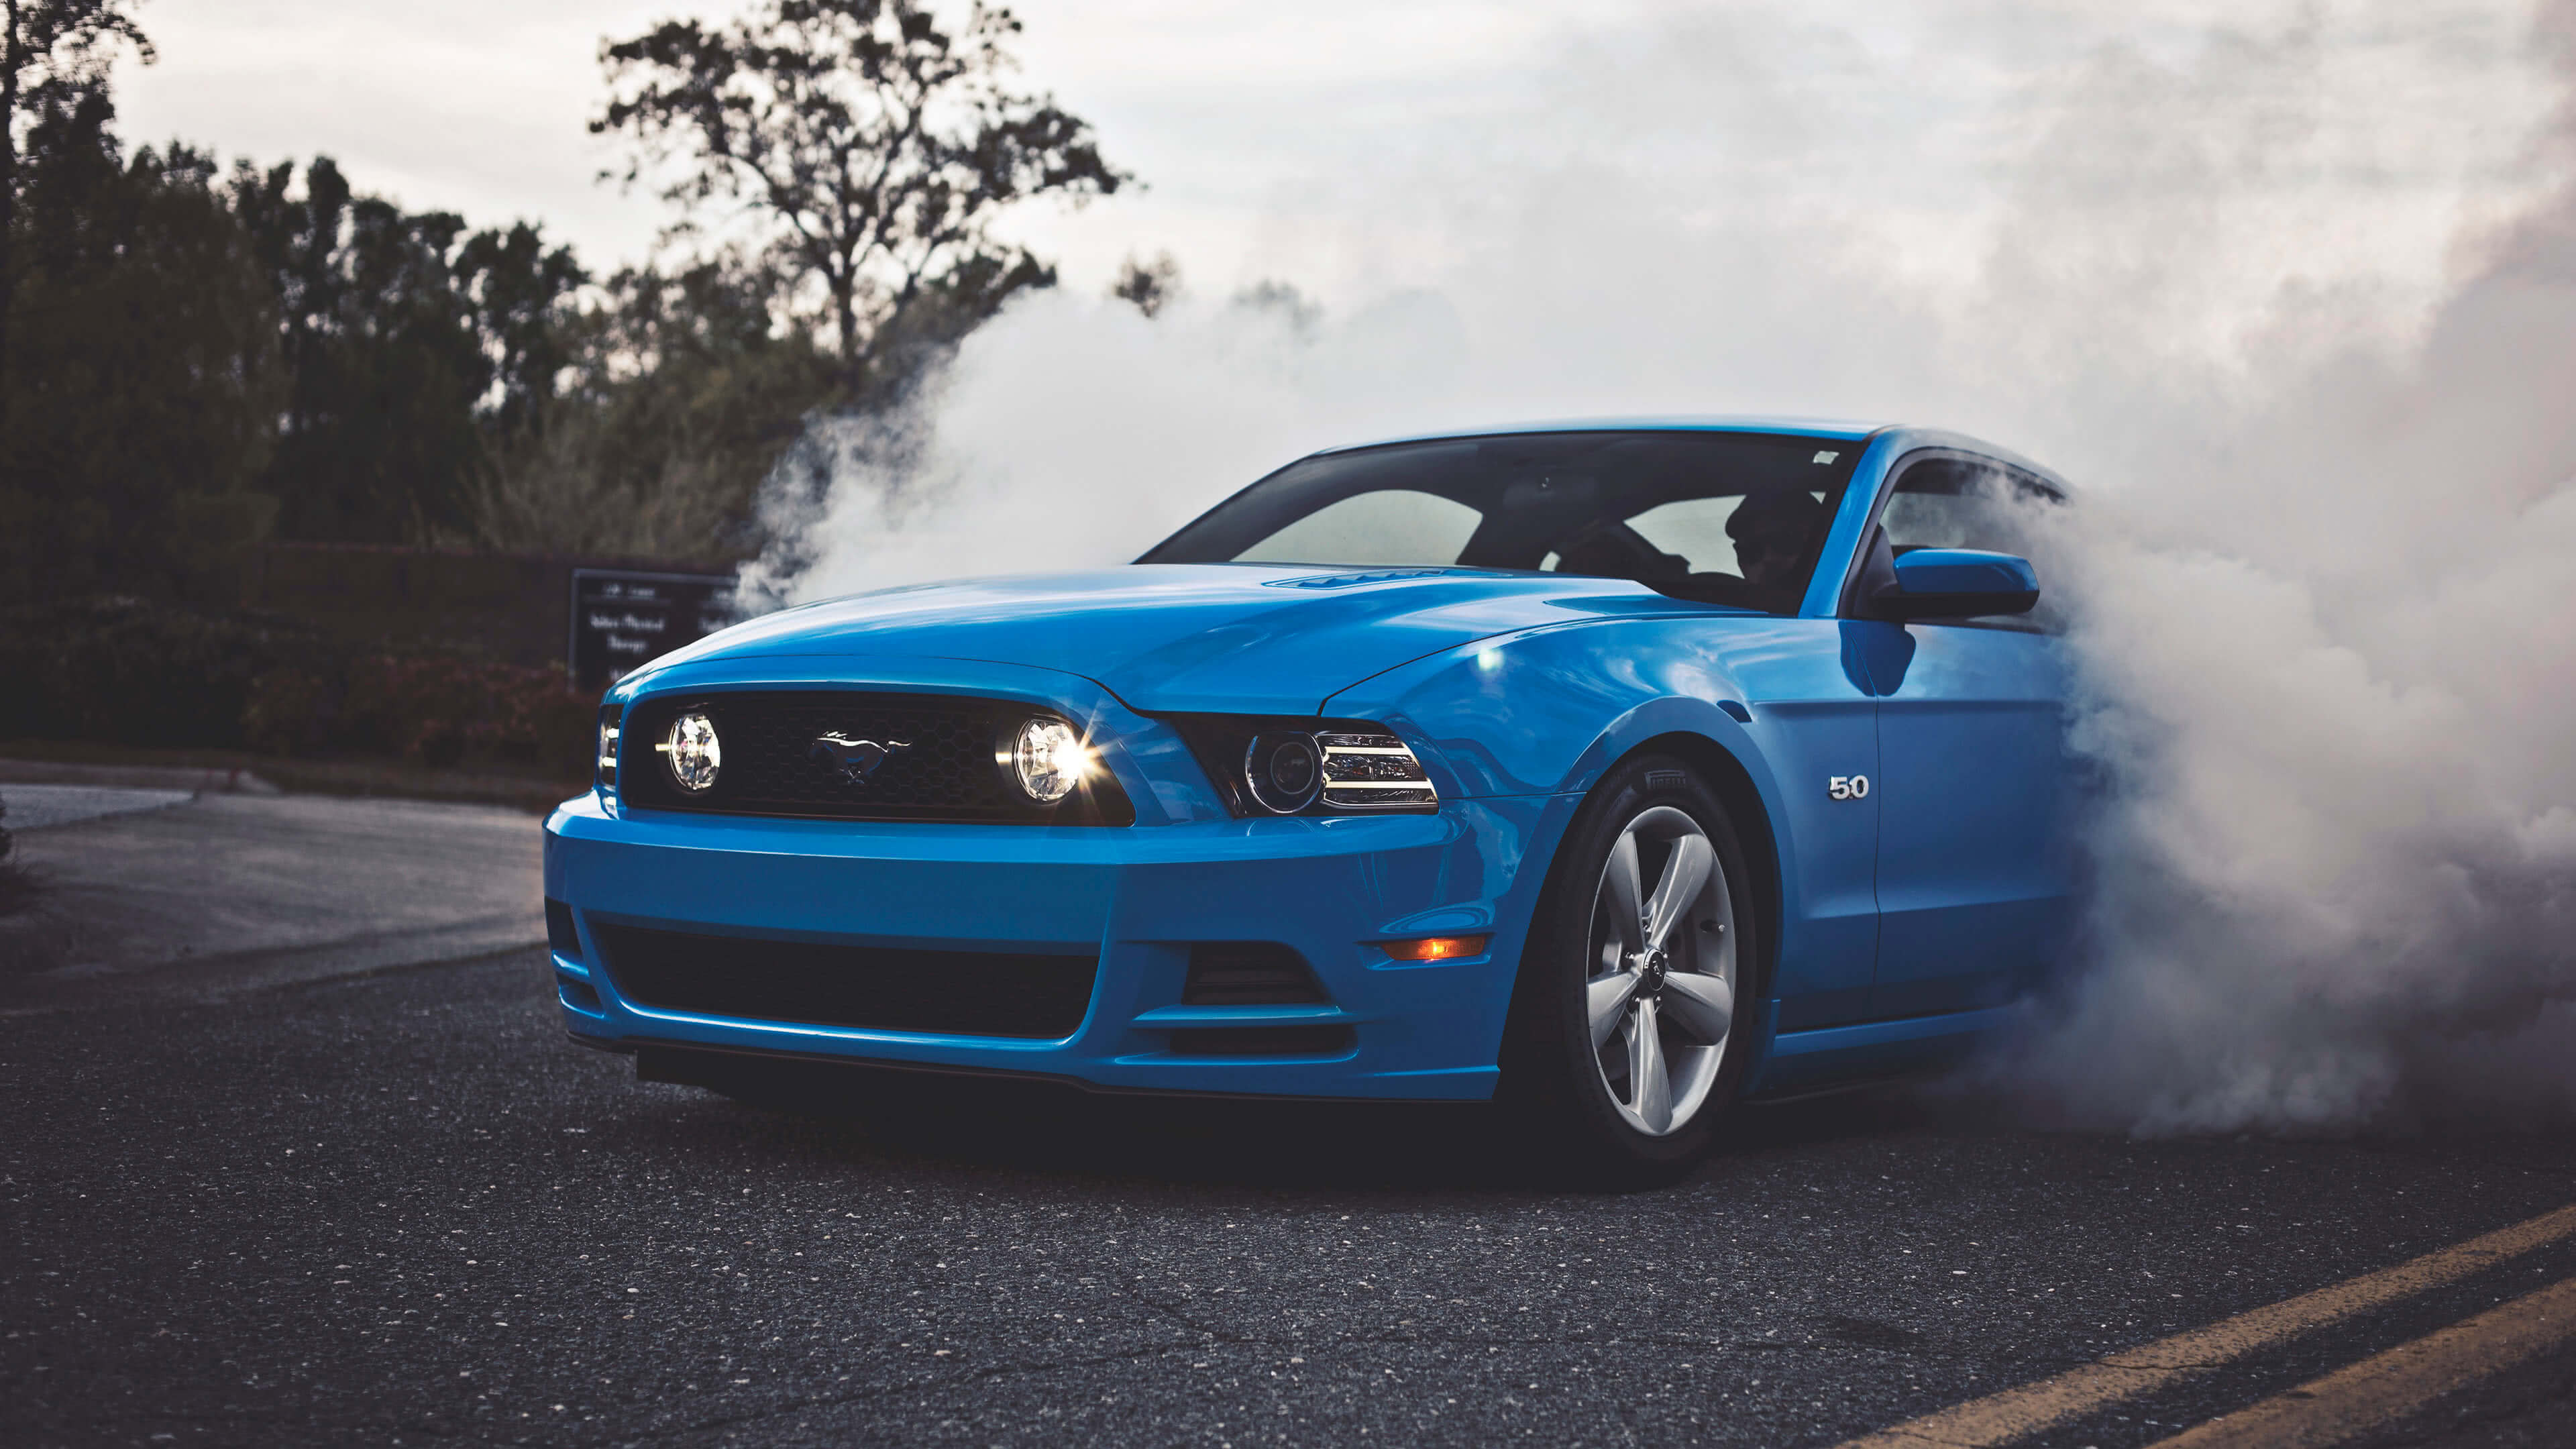 Ford Mustang: A high-performance variant, Shelby American. 3840x2160 4K Wallpaper.